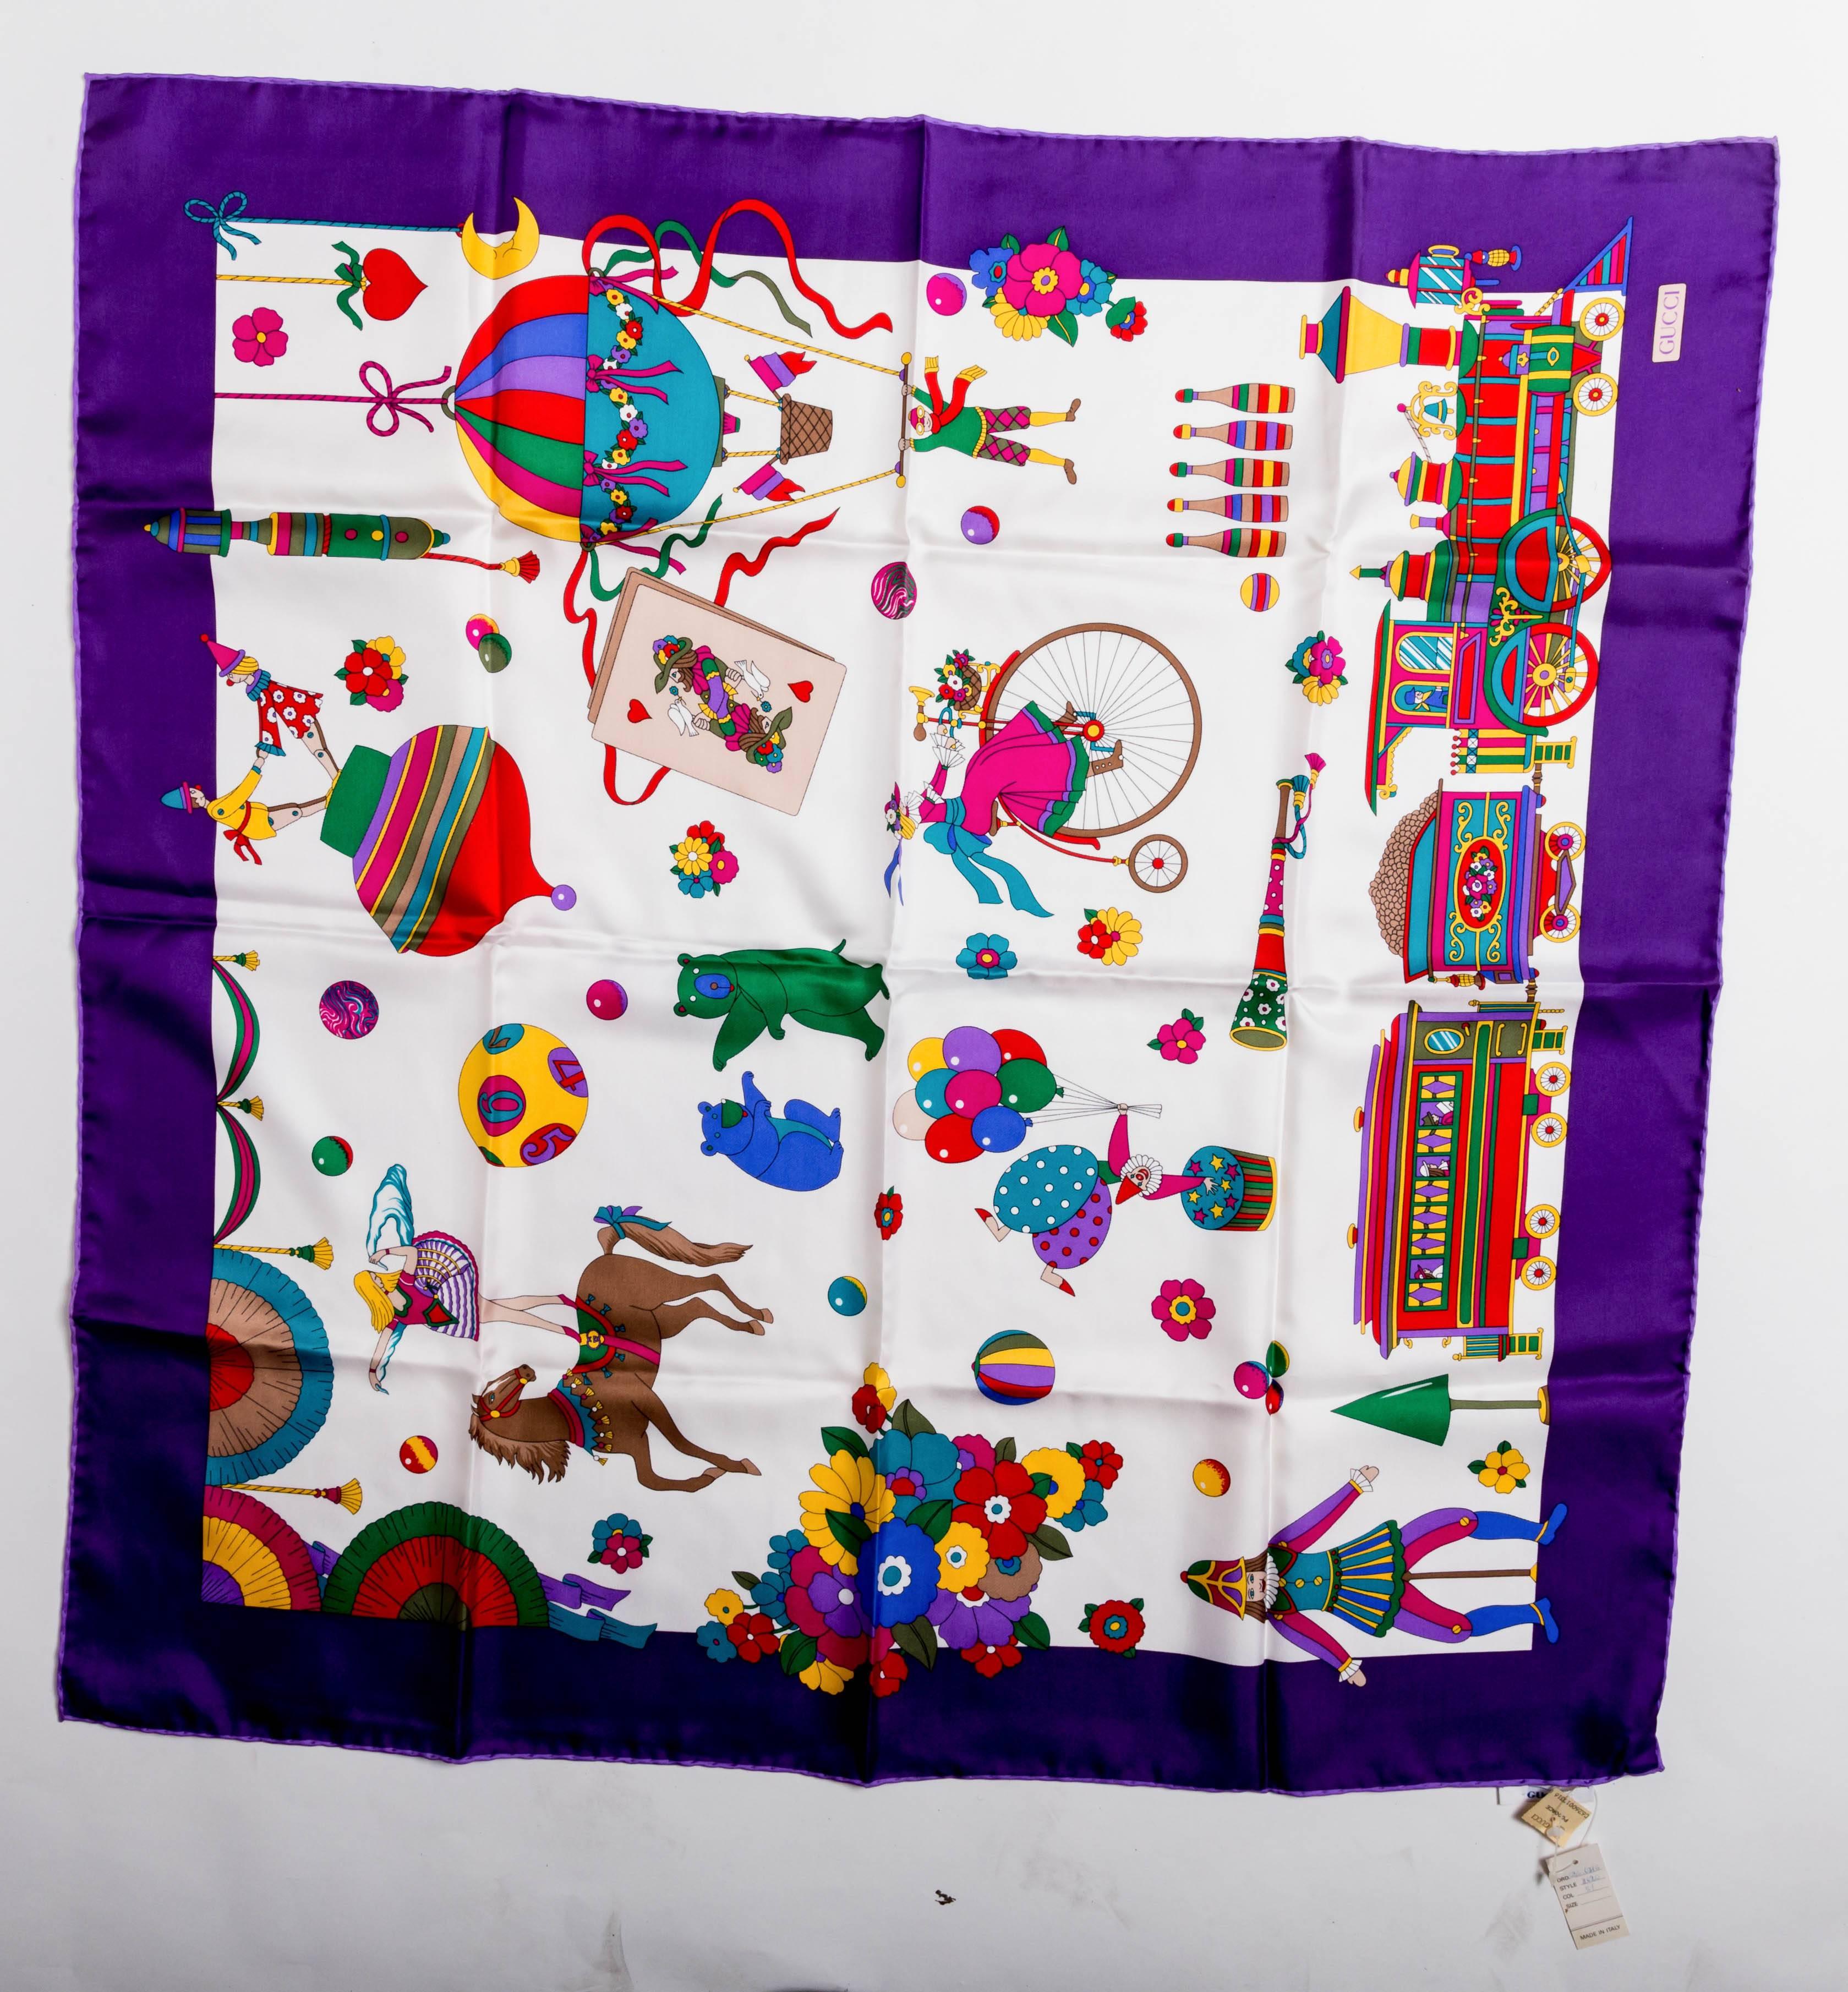 This vintage Gucci scarf has never been used and its original Gucci tags are still attached. Part of Gucci's circus collection, this silk scarf features a purple border and whimsical bears, clowns, horses and flowers throughout. Vibrant colors make